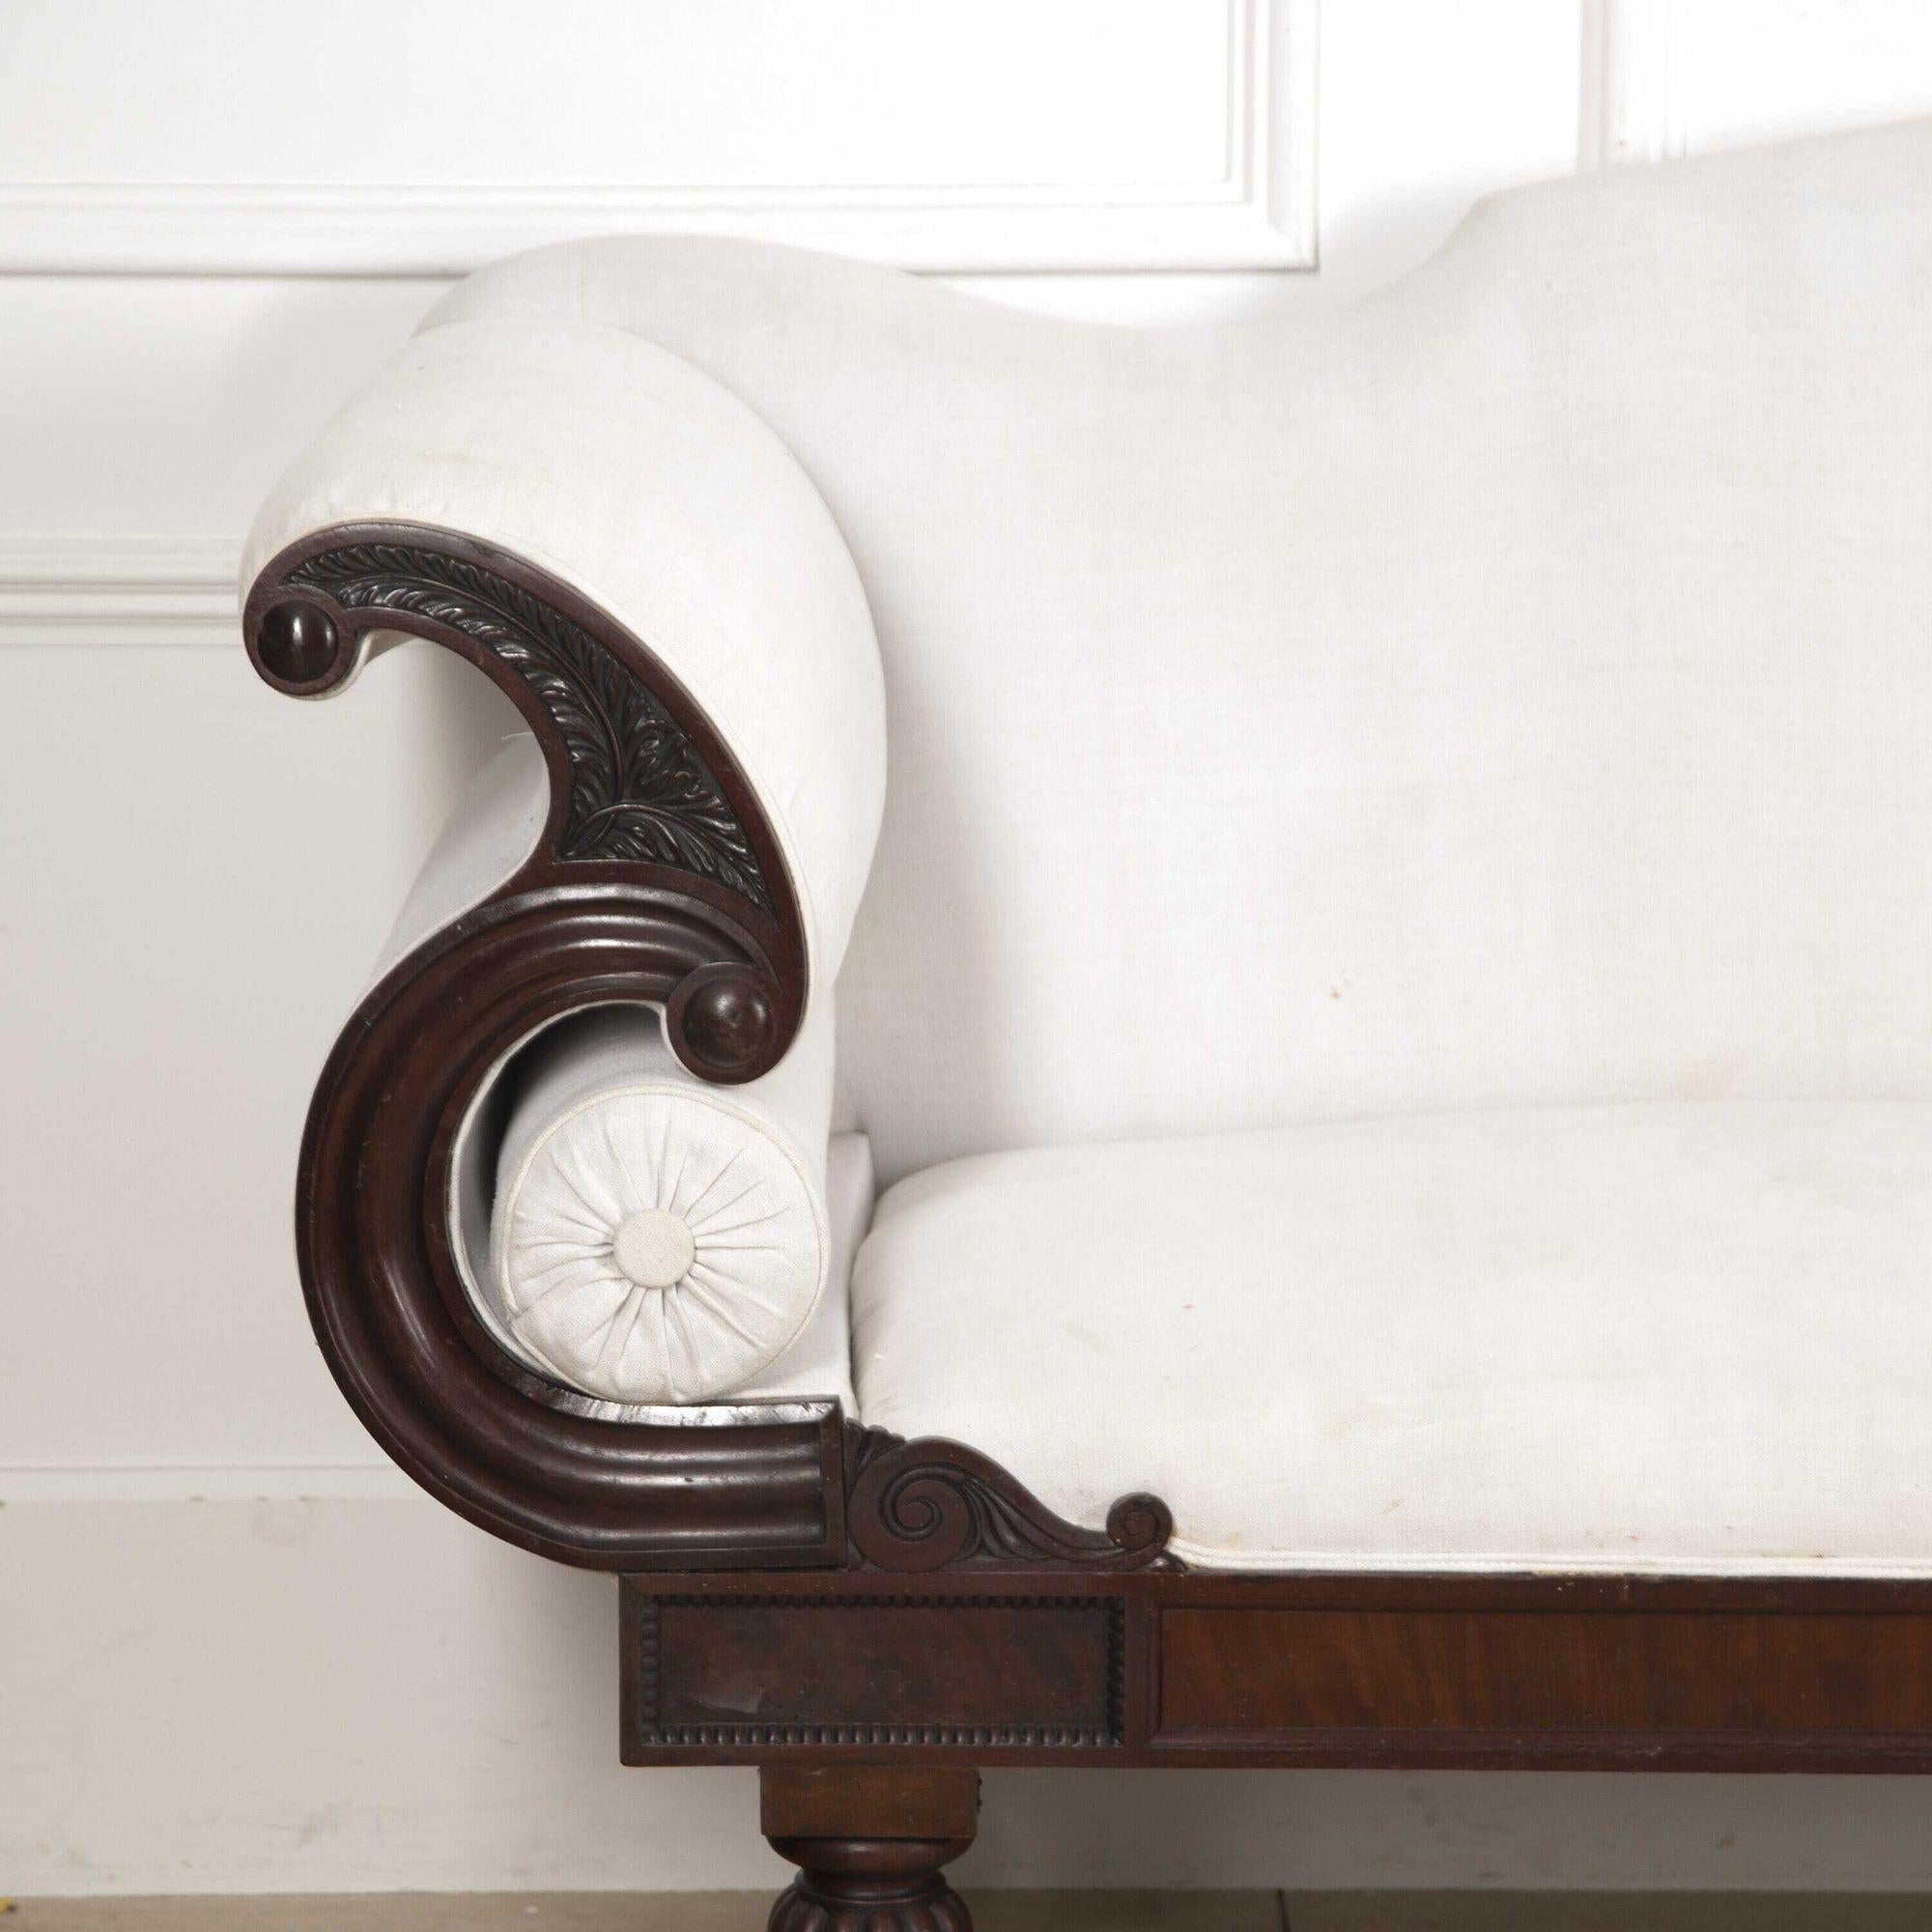 Large English late Regency mahogany sofa.
It has been reupholstered in antique natural linen that highlights the mahogany structure wonderfully. The linen has some light marks but this does not detract from its timeless style. 
Featuring scrolled